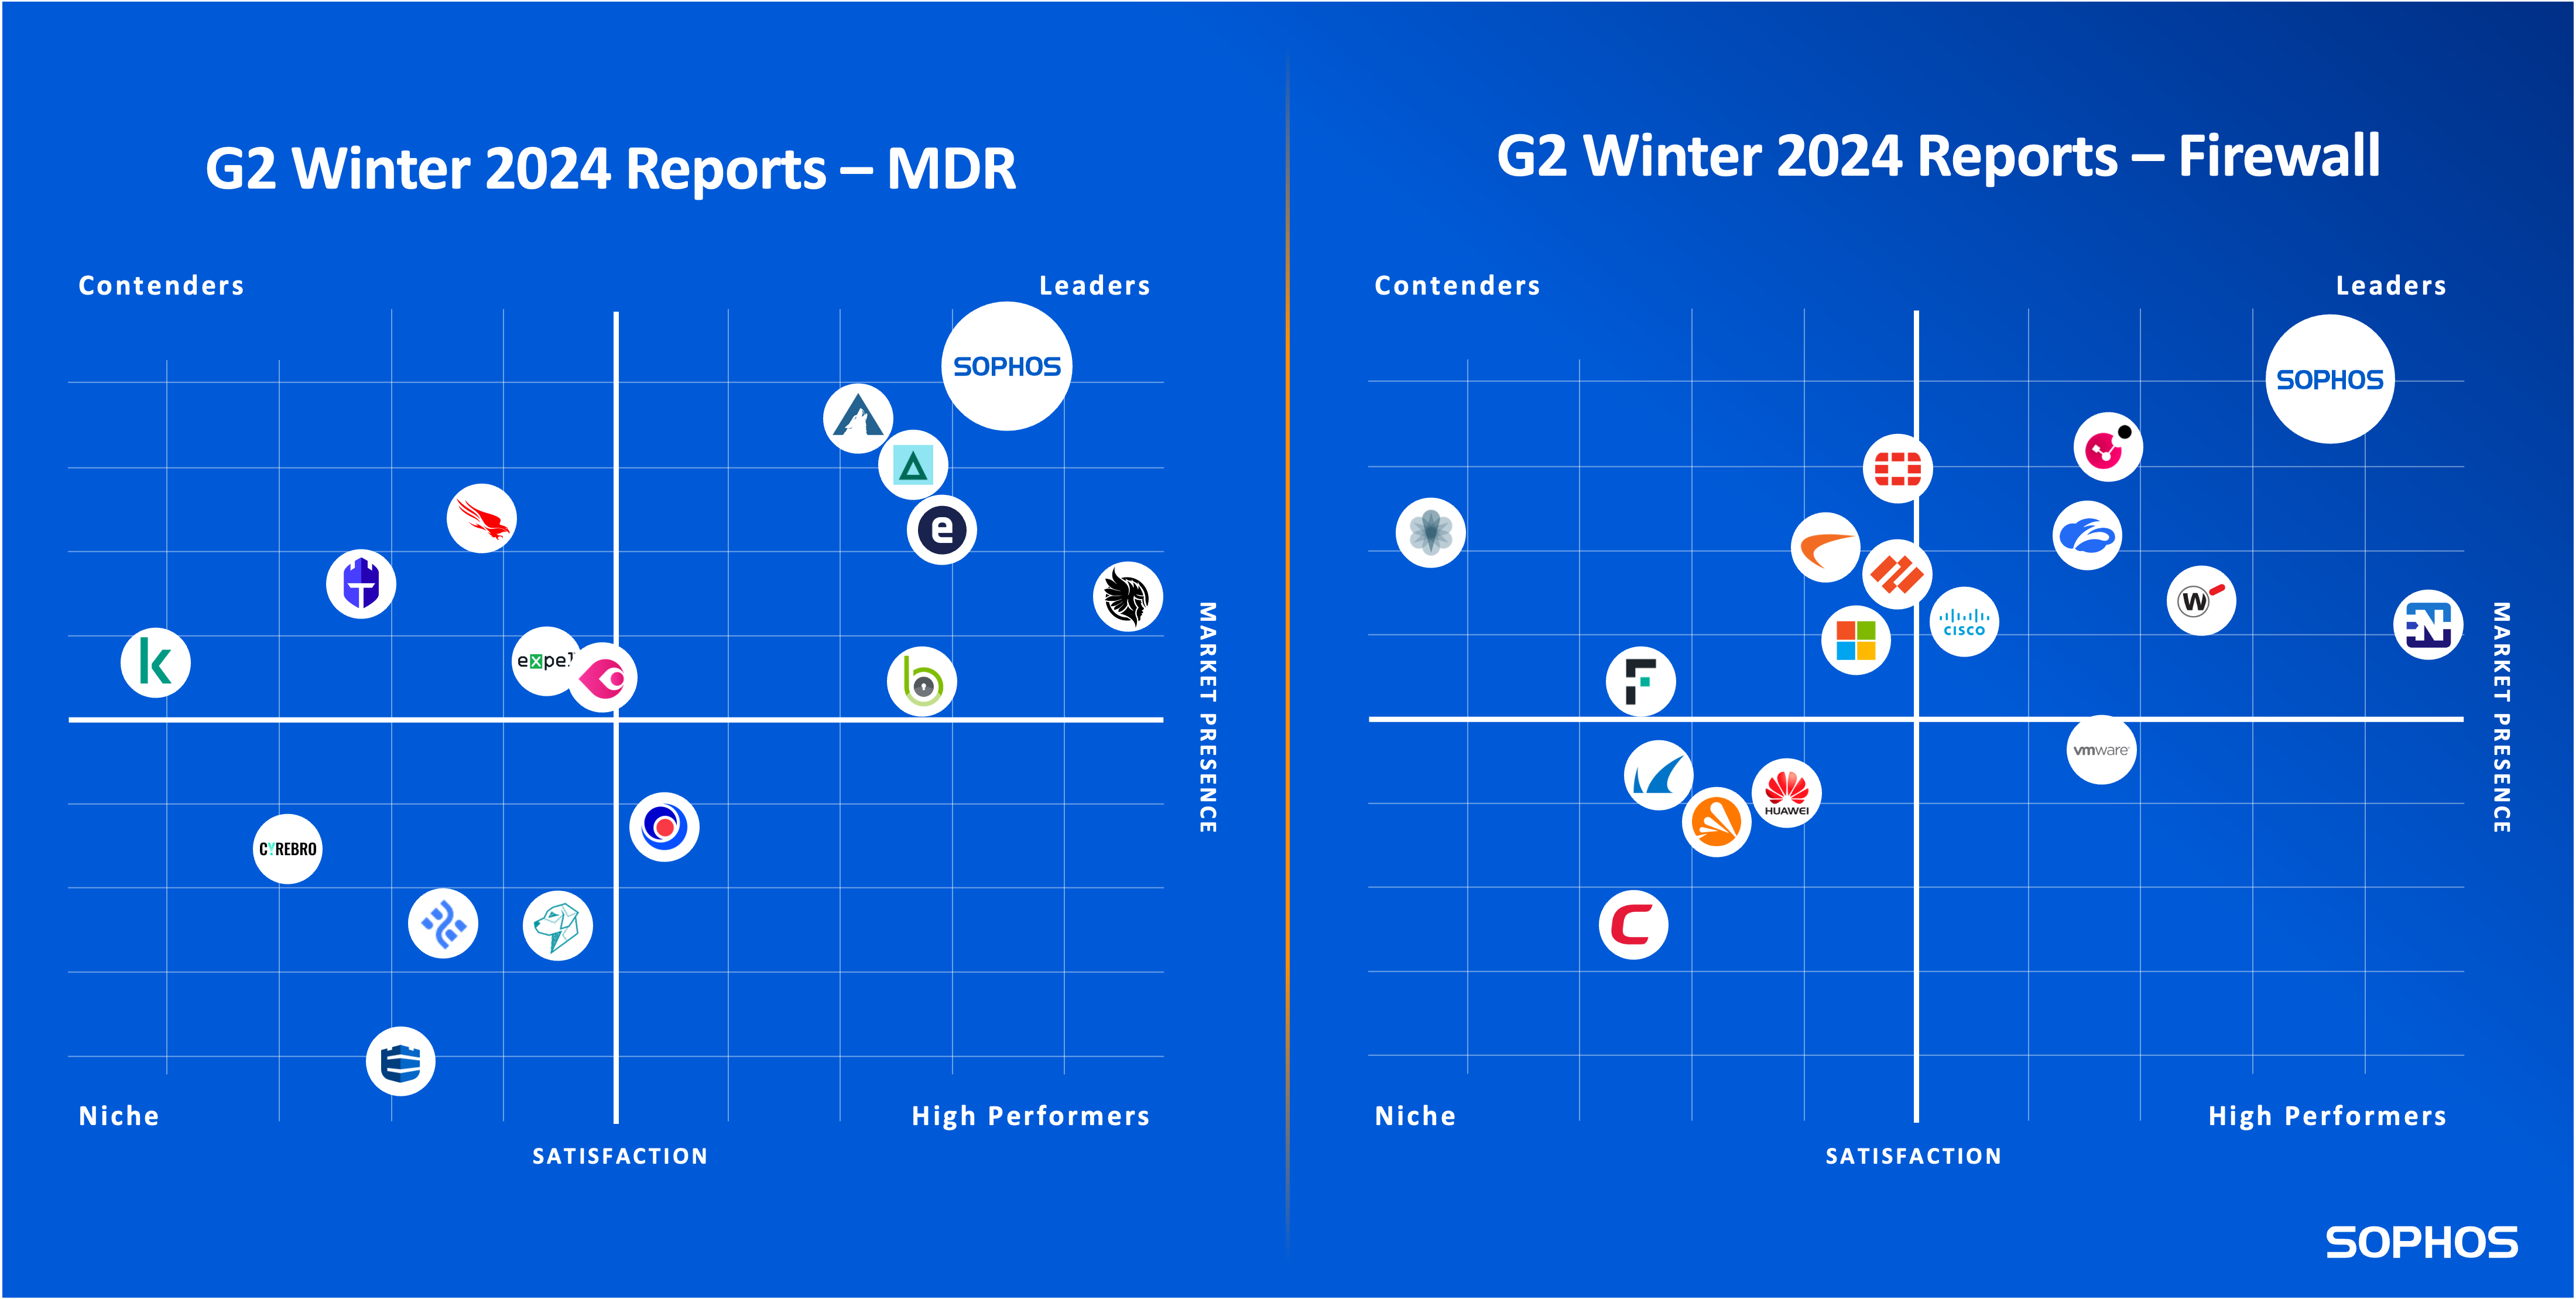 G2 Winter 2024 Report MDR and Firewall grids